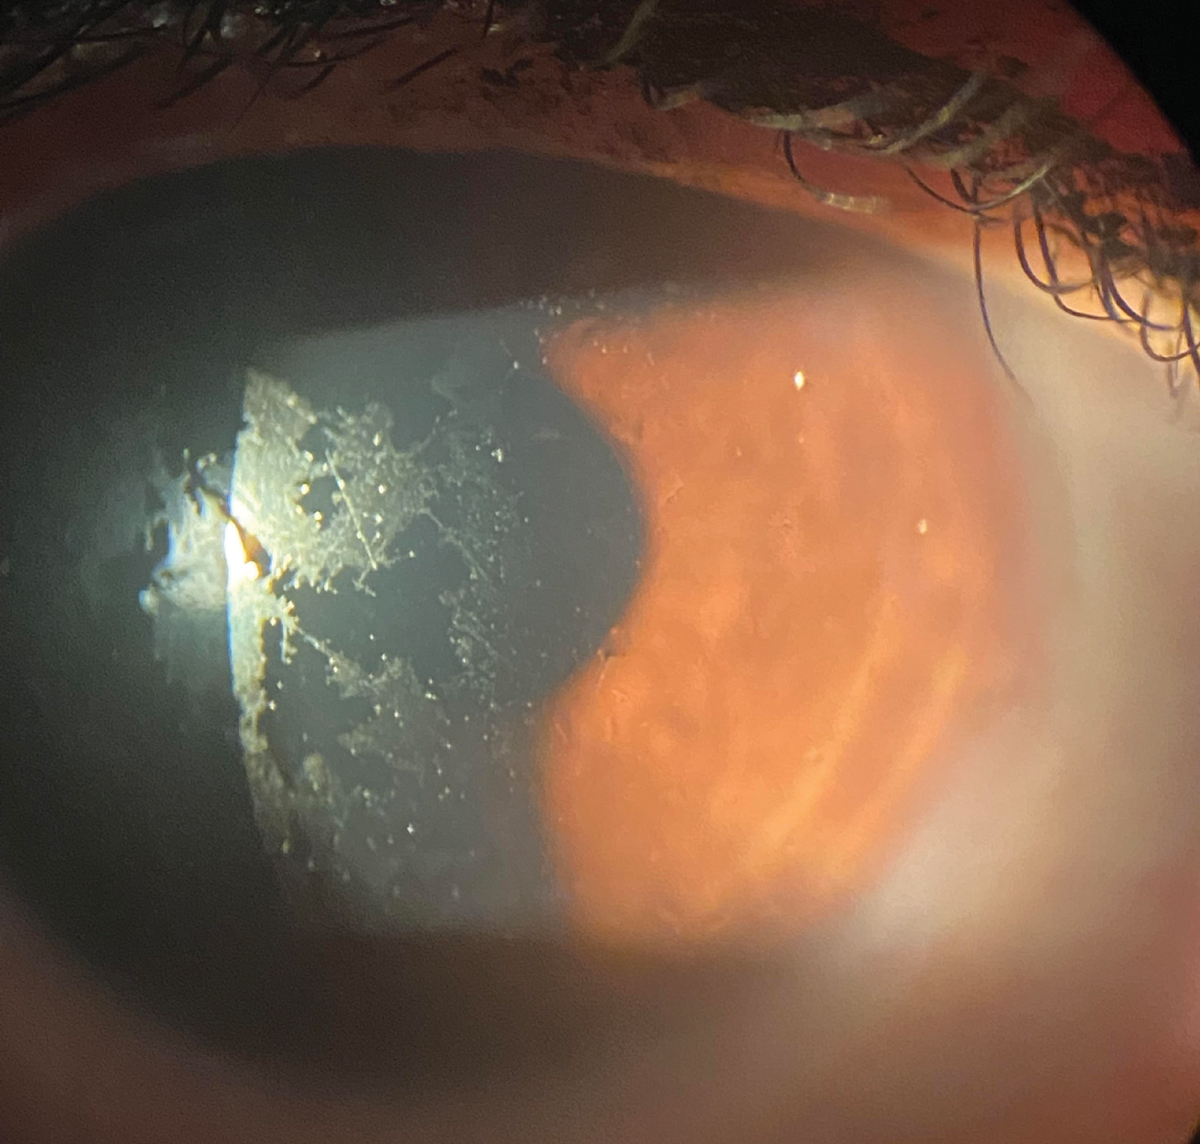 A patient complaining of discomfort and foggy vision, showing poor wettability of their scleral lens. The issues resolved with the addition of a Hydra-PEG coating.